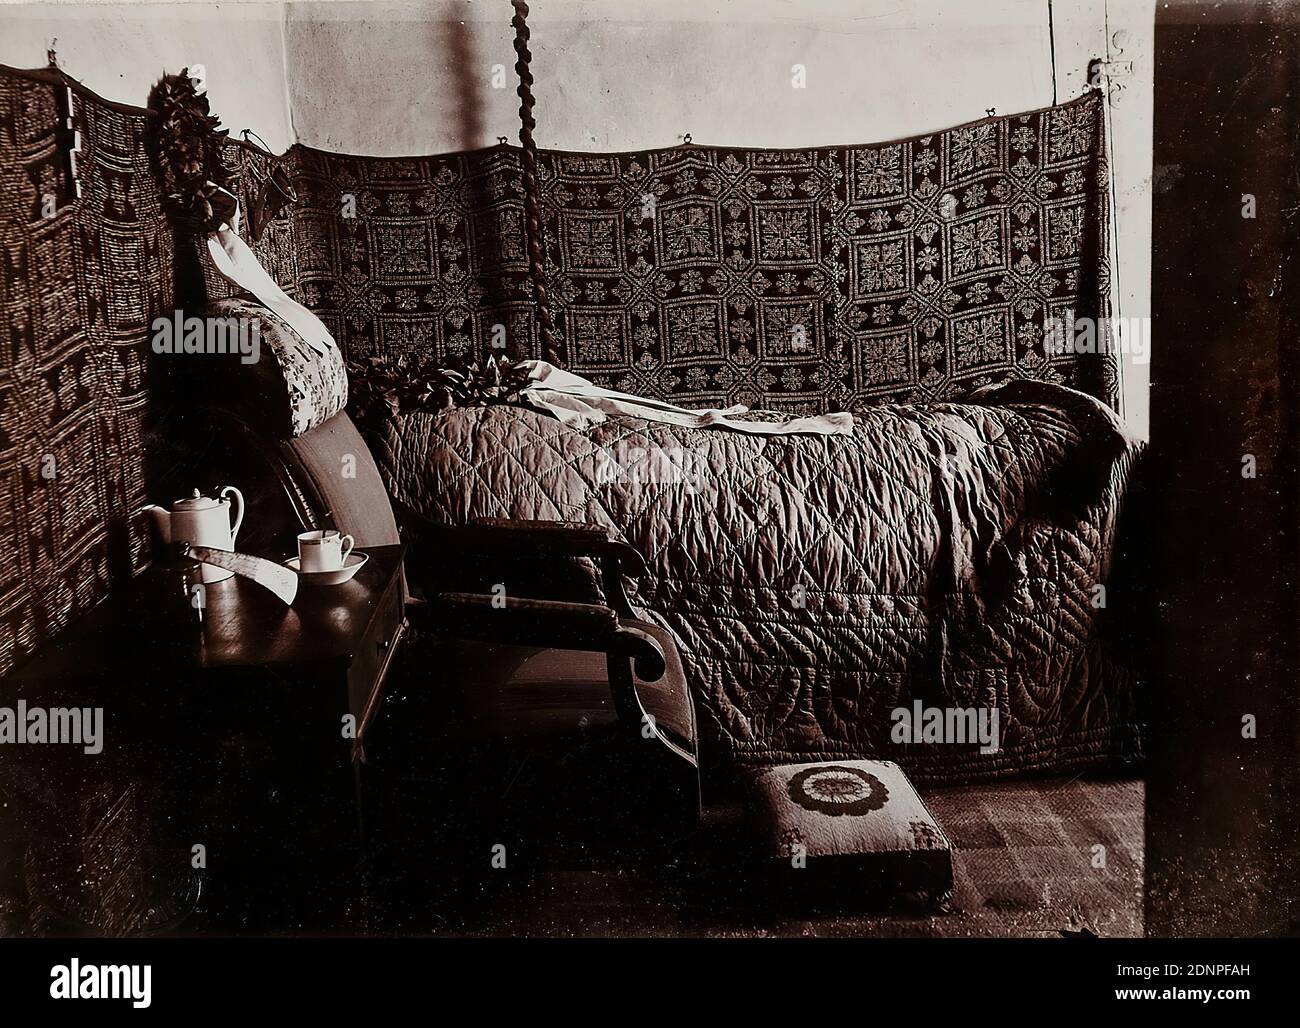 Louis Held, bedroom, Goethe-house, Weimar, collodion paper glossy, black and white positive process, image size: height: 11.10 cm; width: 15.40 cm, dry stamp: recto and: GOETHE NATIONAL MUSEUM WEIMAR; Louis Held, Weimar, 1904, inventory no. in lead, reporting photography, hist. building, location, street, bedroom, museum, bed, armchair, armchair Stock Photo